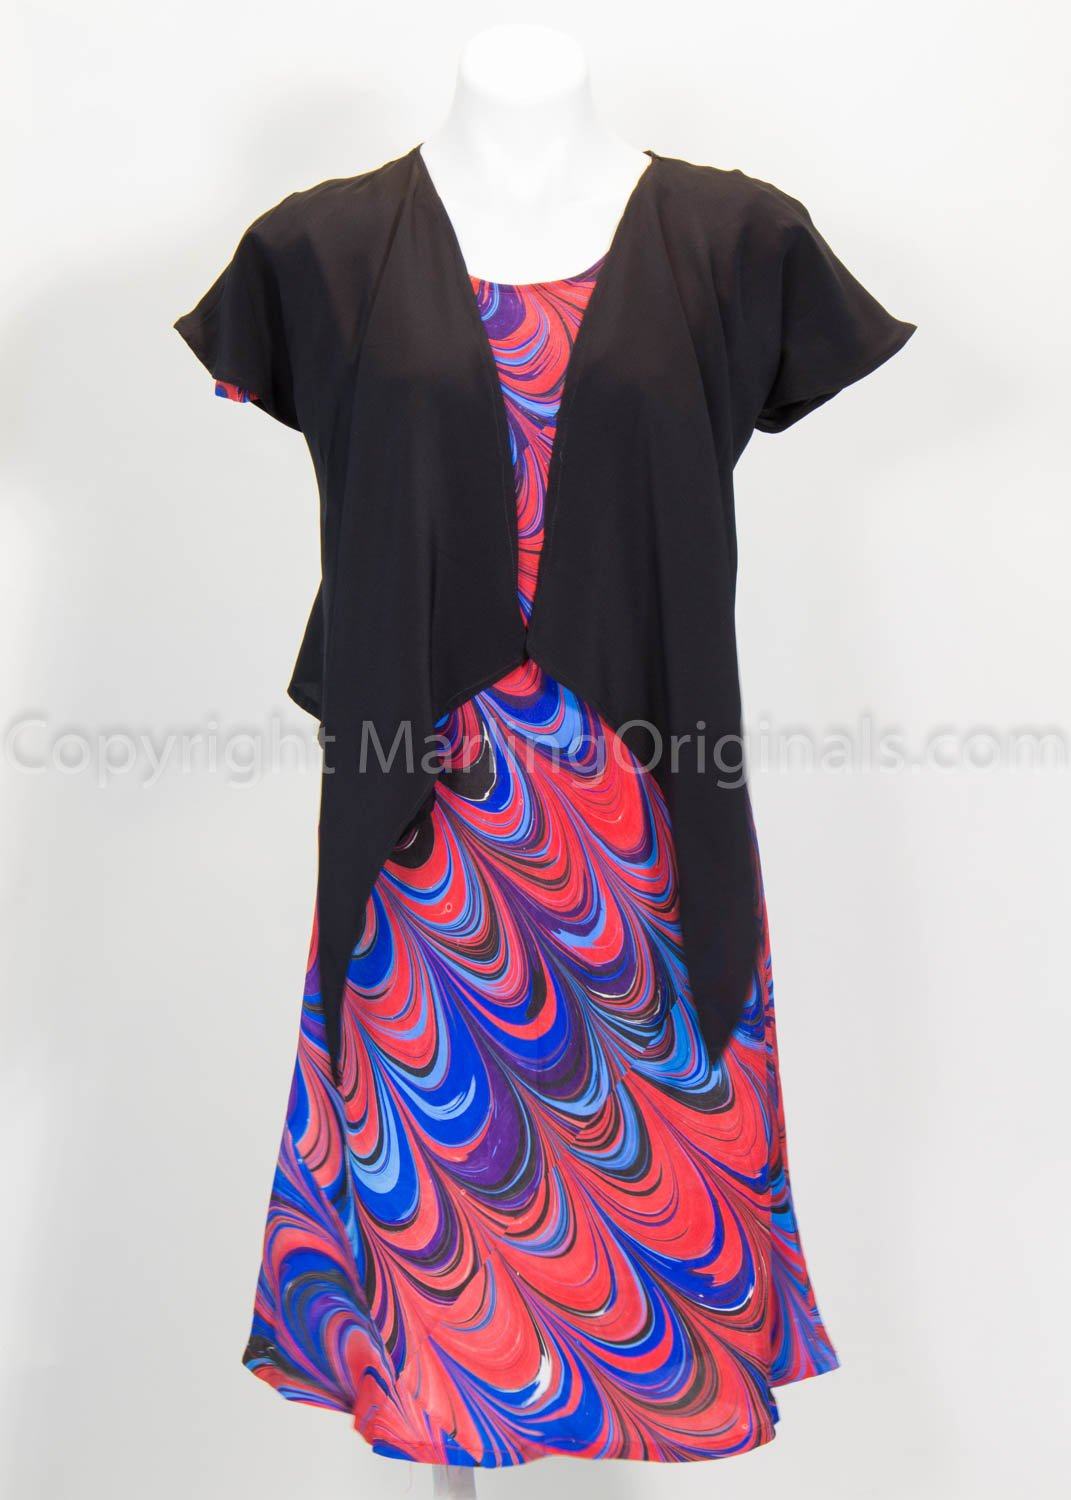 marb;ed dress with solid black jacket 